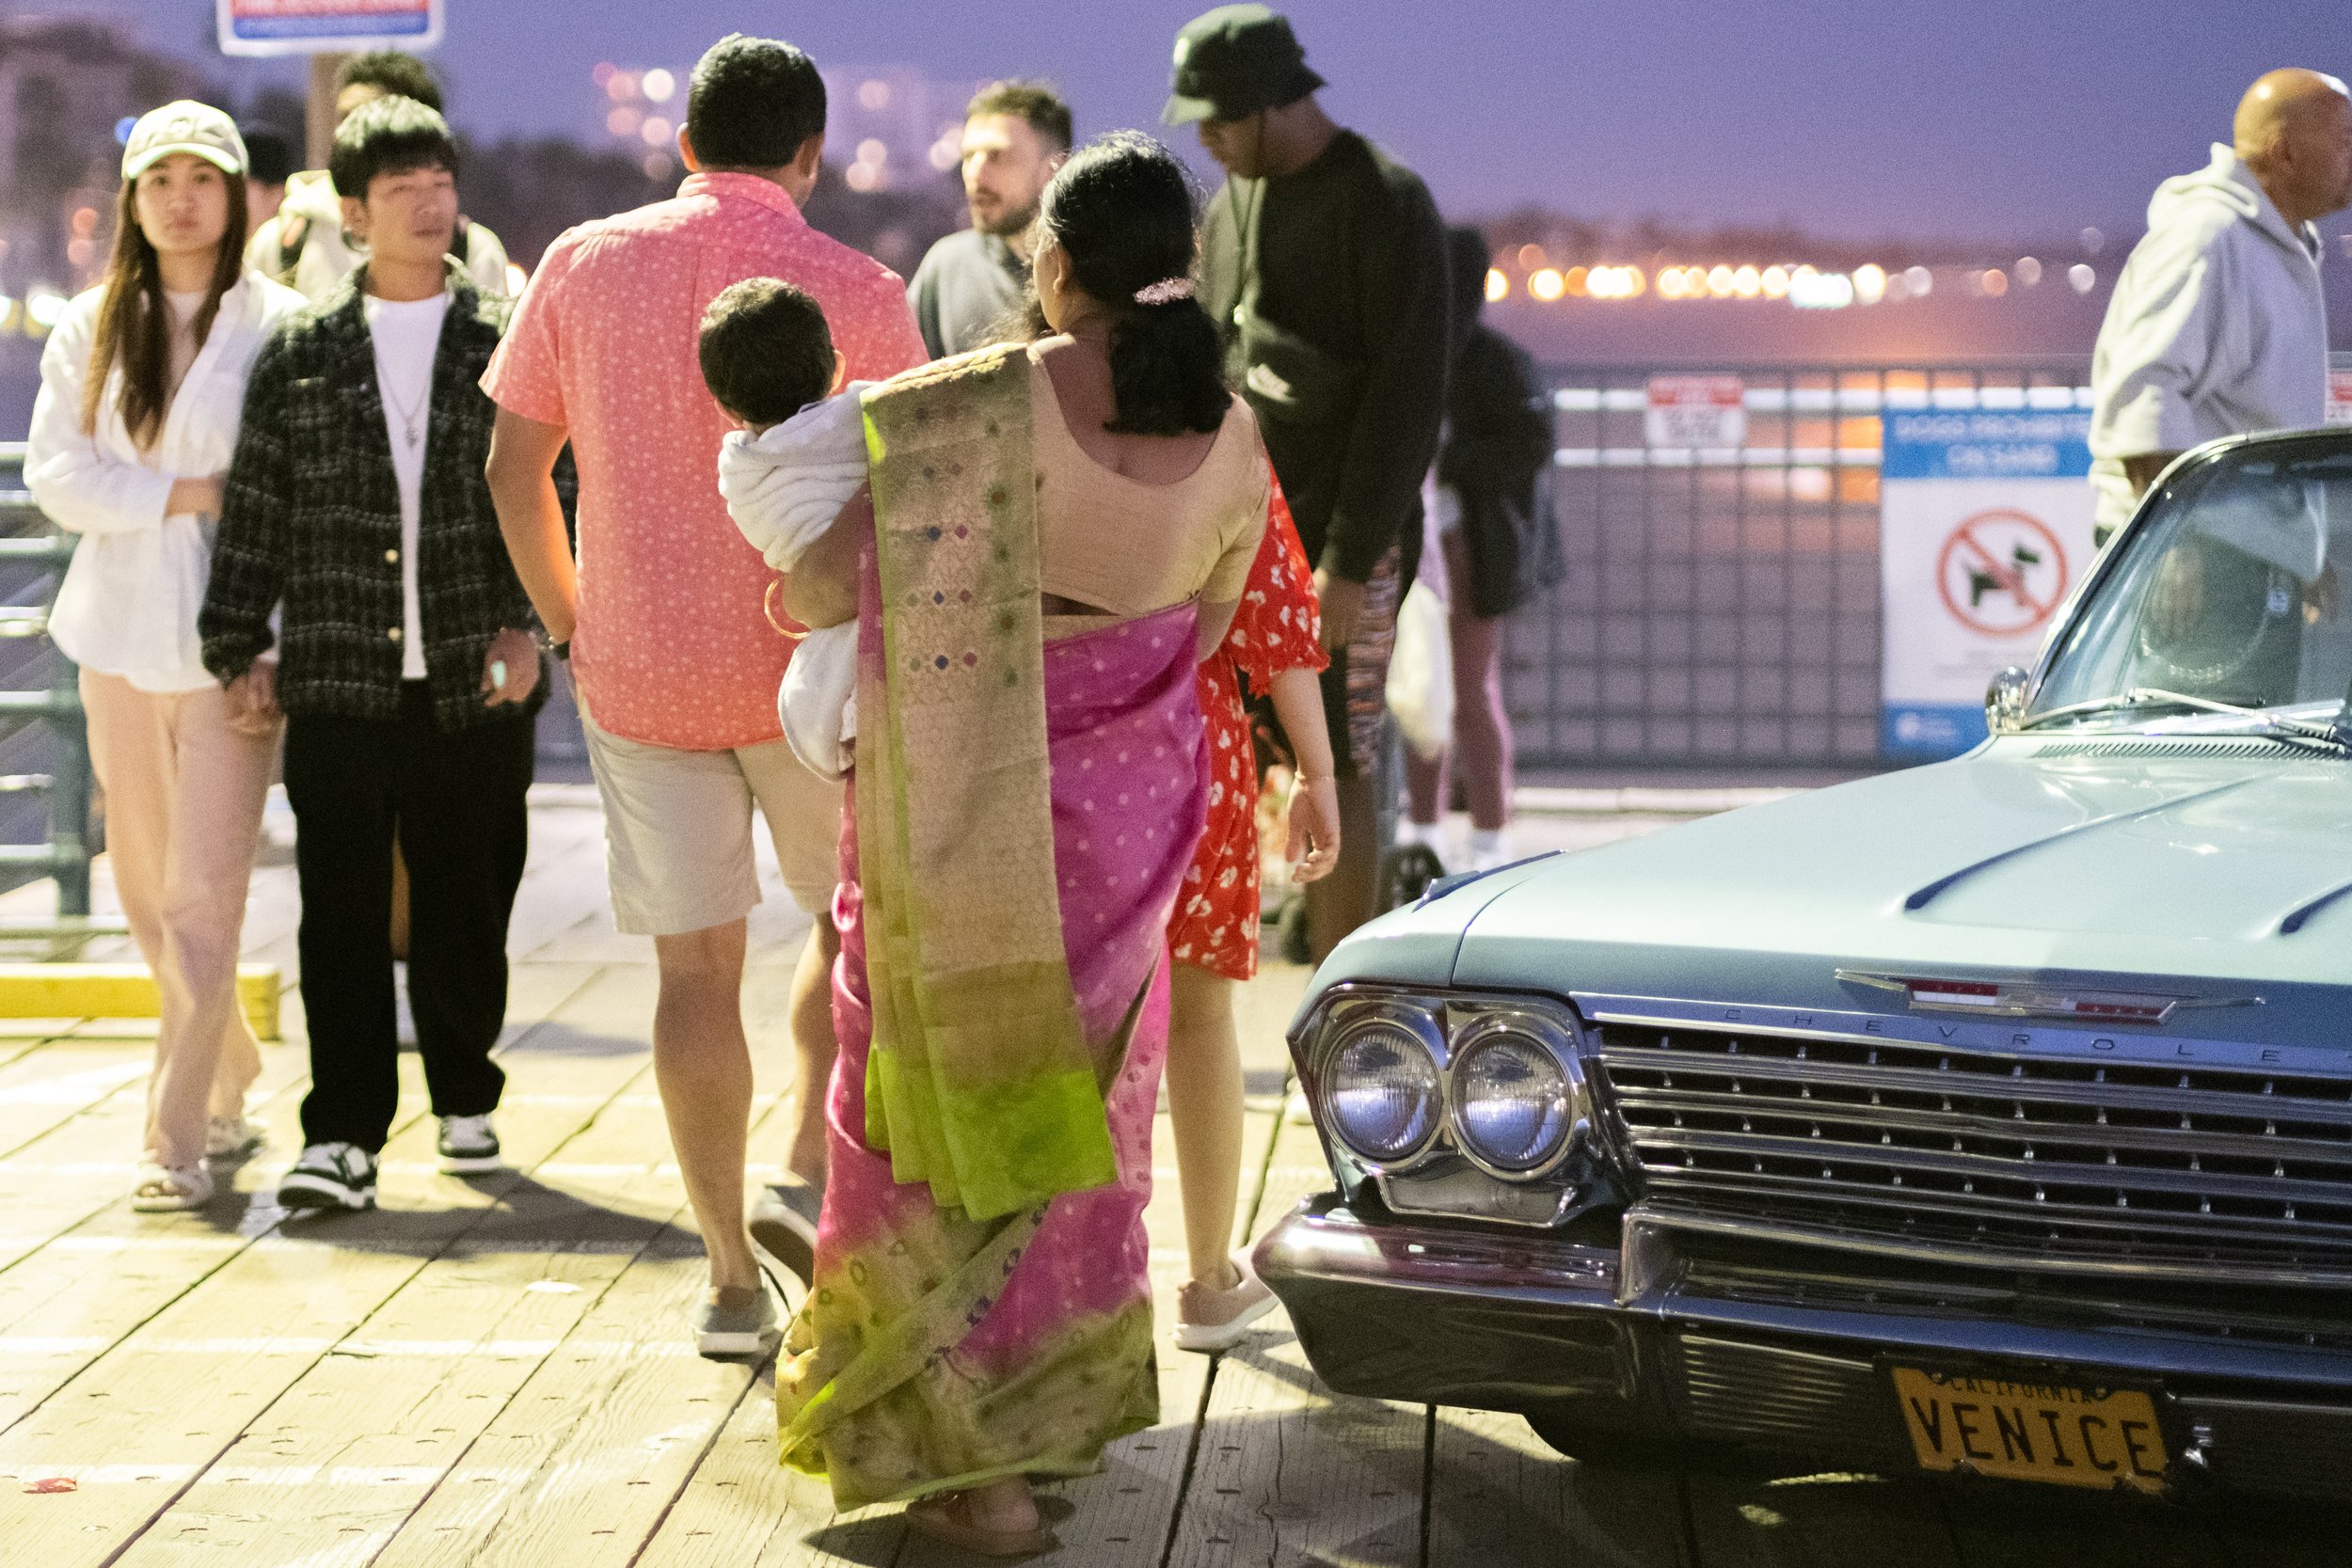  There was a diverse crowd at Locals' Night on Thursday, April 20, 2023 on the Santa Monica Pier on the parking deck in Santa Monica, Calif. The pier hosts Locals' Night every third Thursday with free programming from 4:00pm to 10:00pm.  (Akemi Rico 